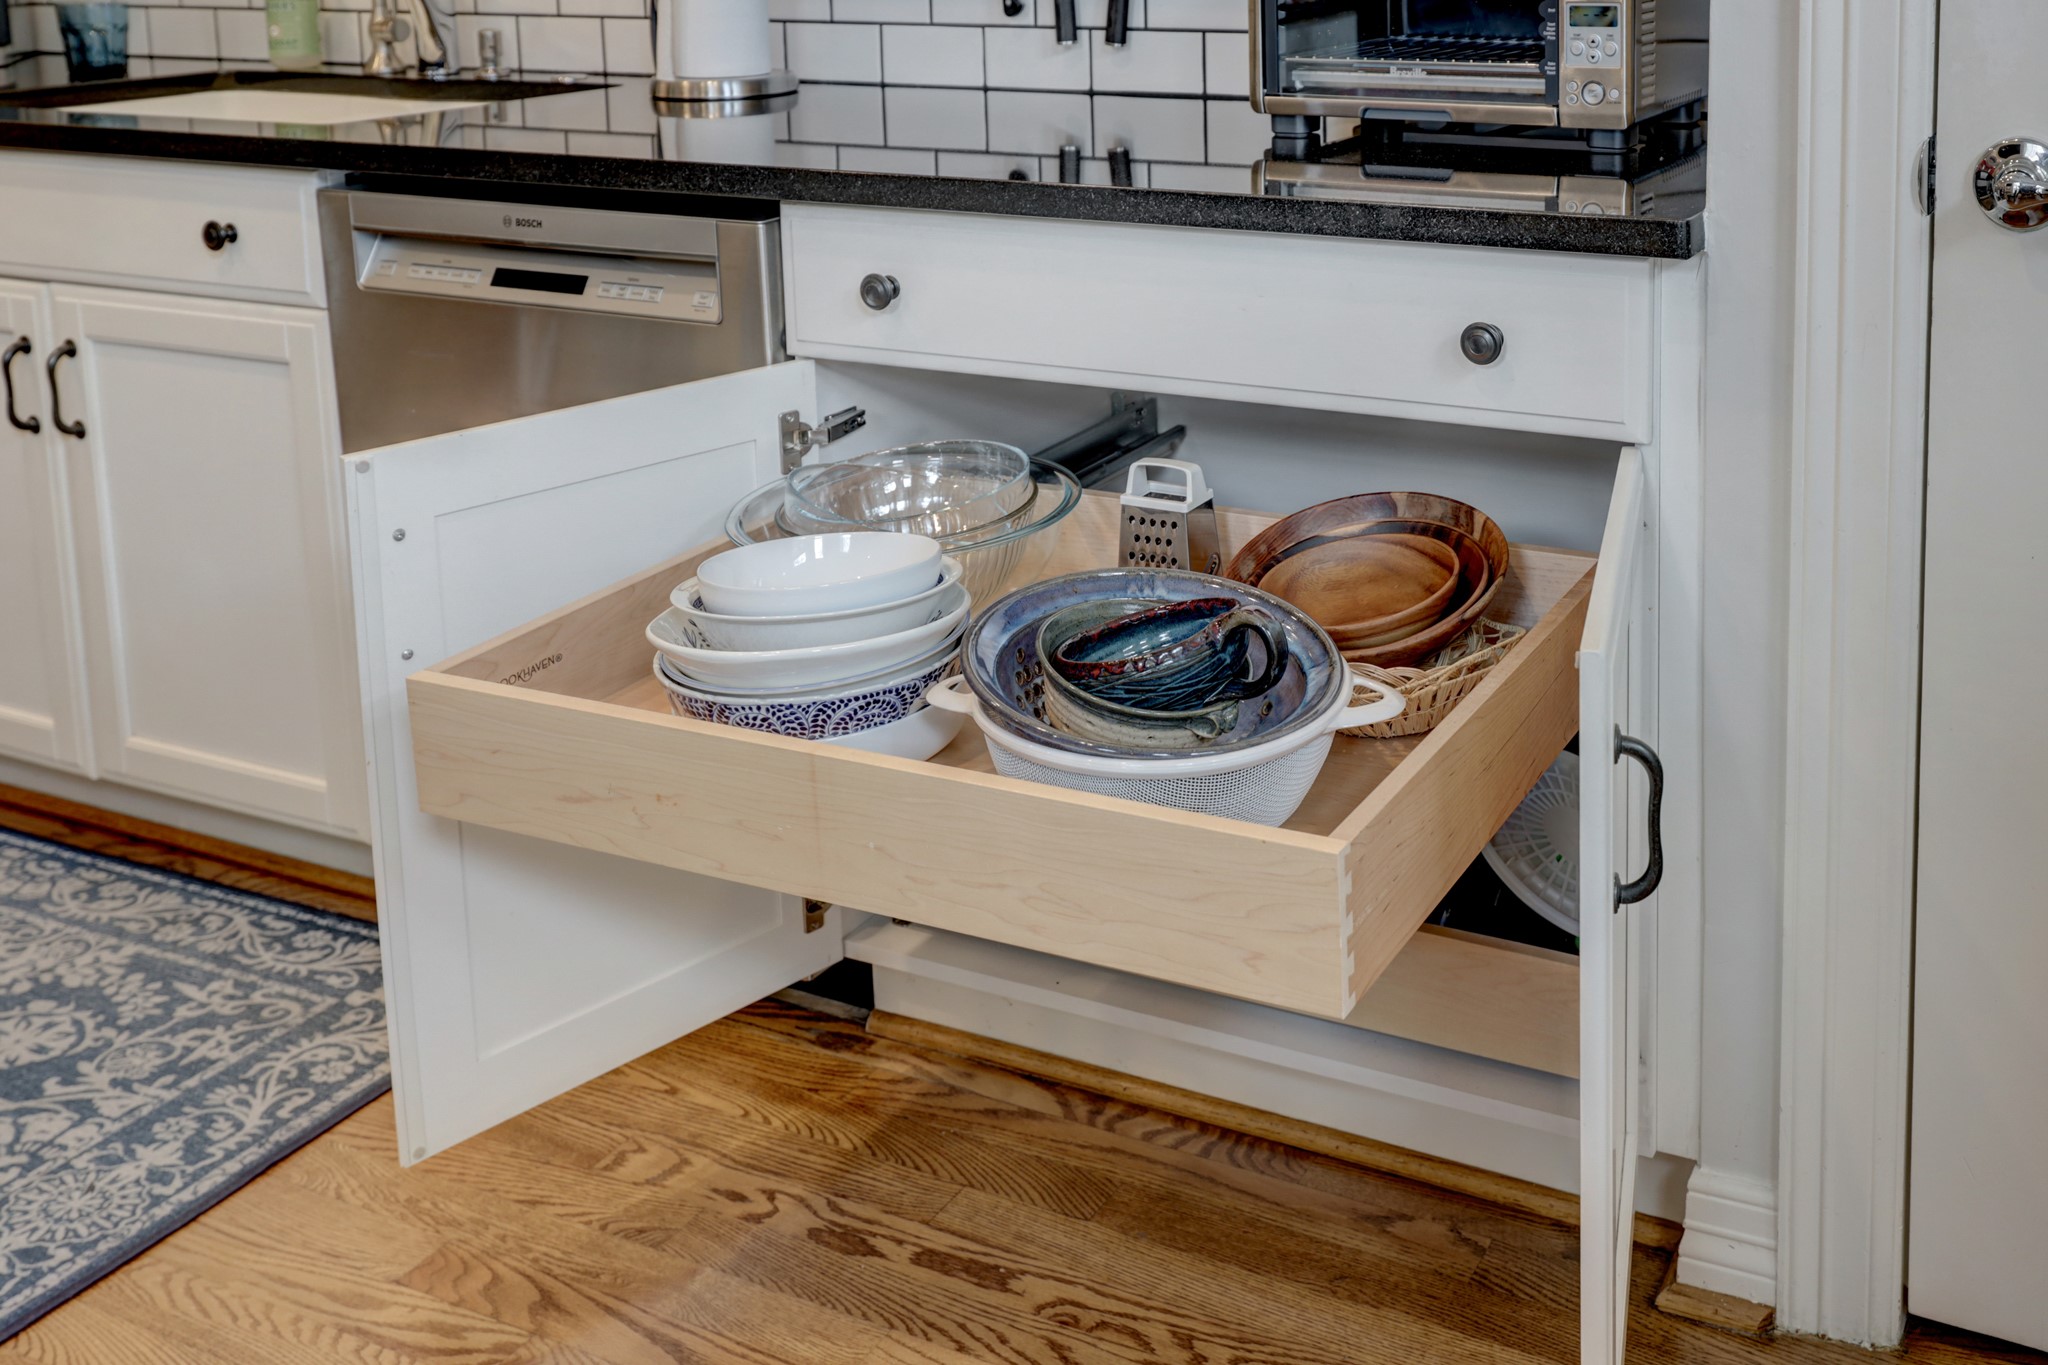 The pull out drawers in the kitchen allow you to easily organize and reach your pots and pans.